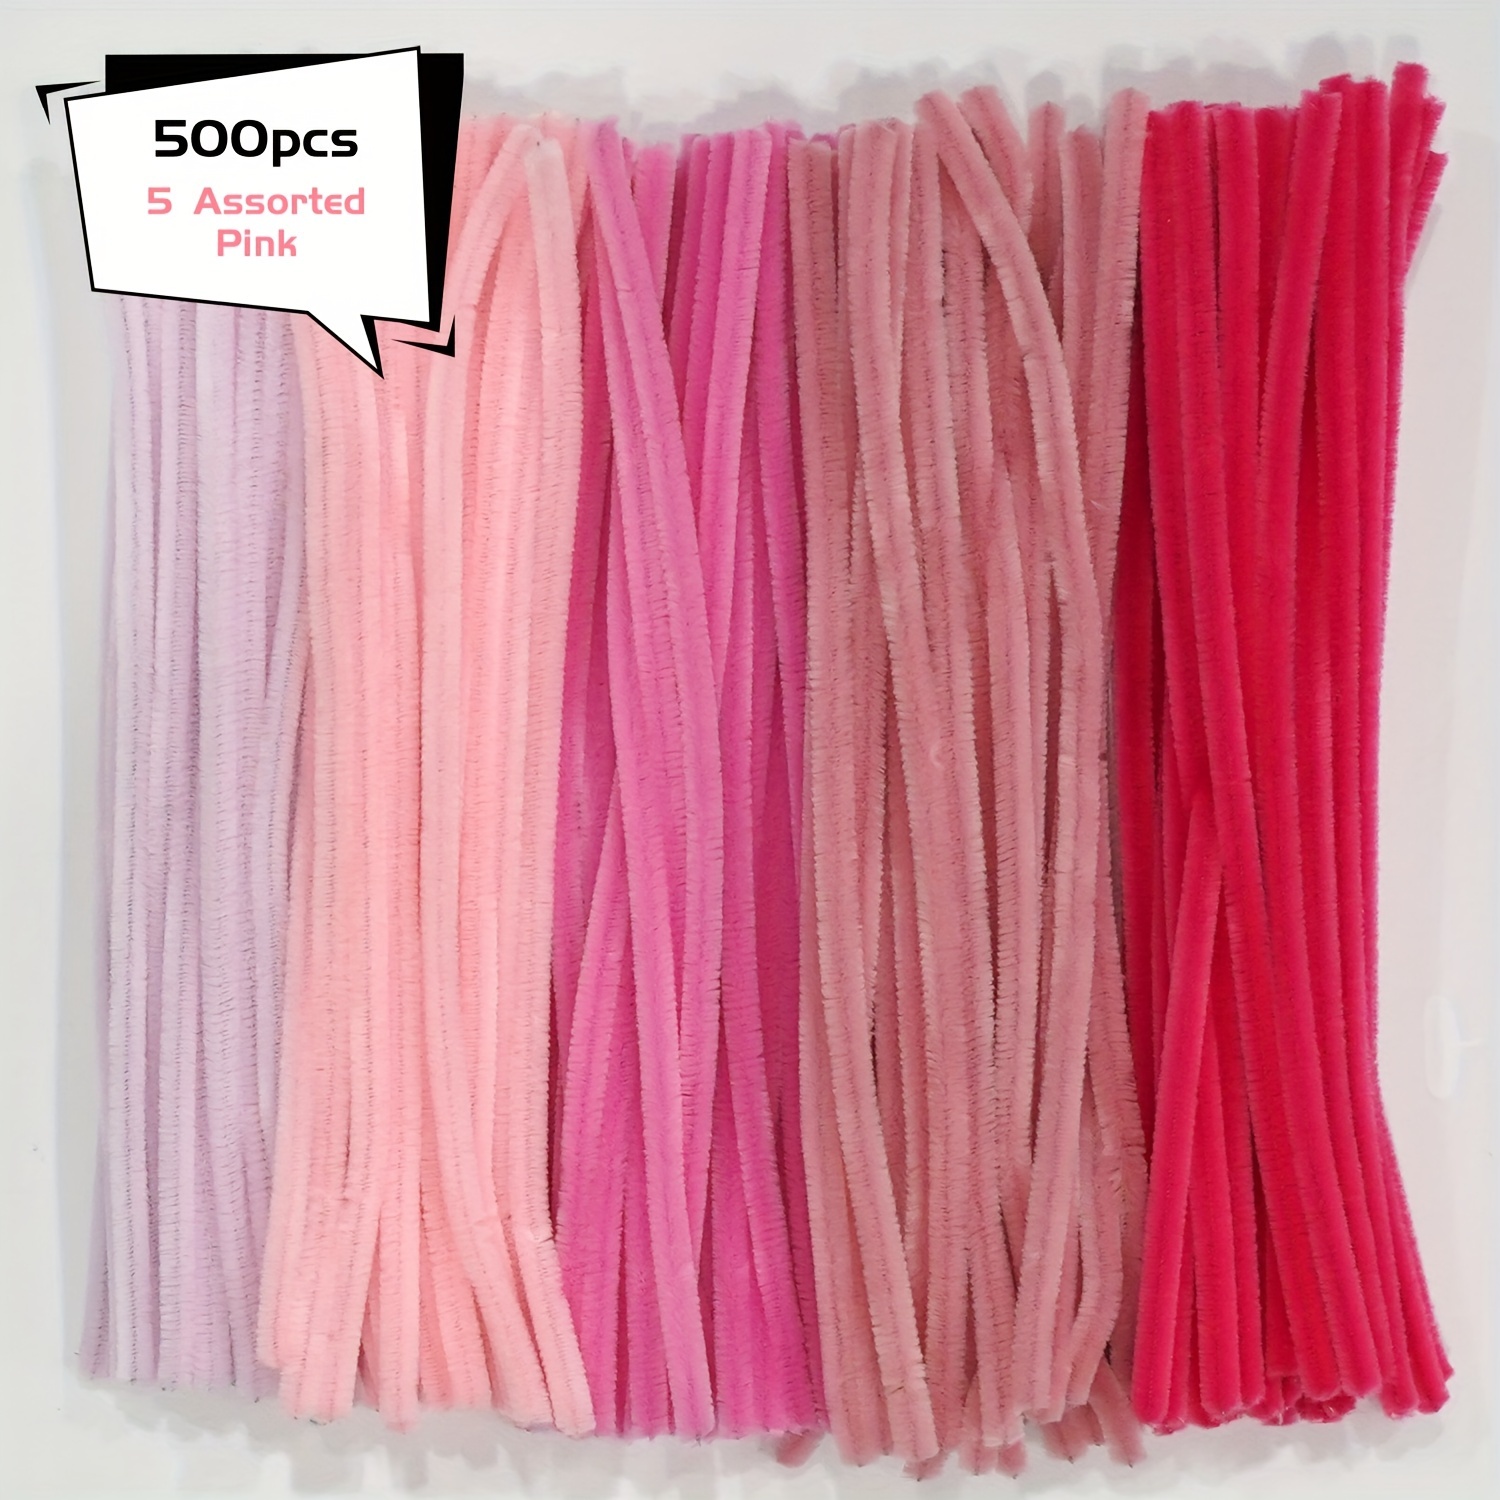 

500 Pack Fabric Pipe Cleaners Craft Supplies - Assorted Pink Chenille Stems Bulk Set For Diy Art Projects, Creative Crafts & Party Decorations, 12-inch Length